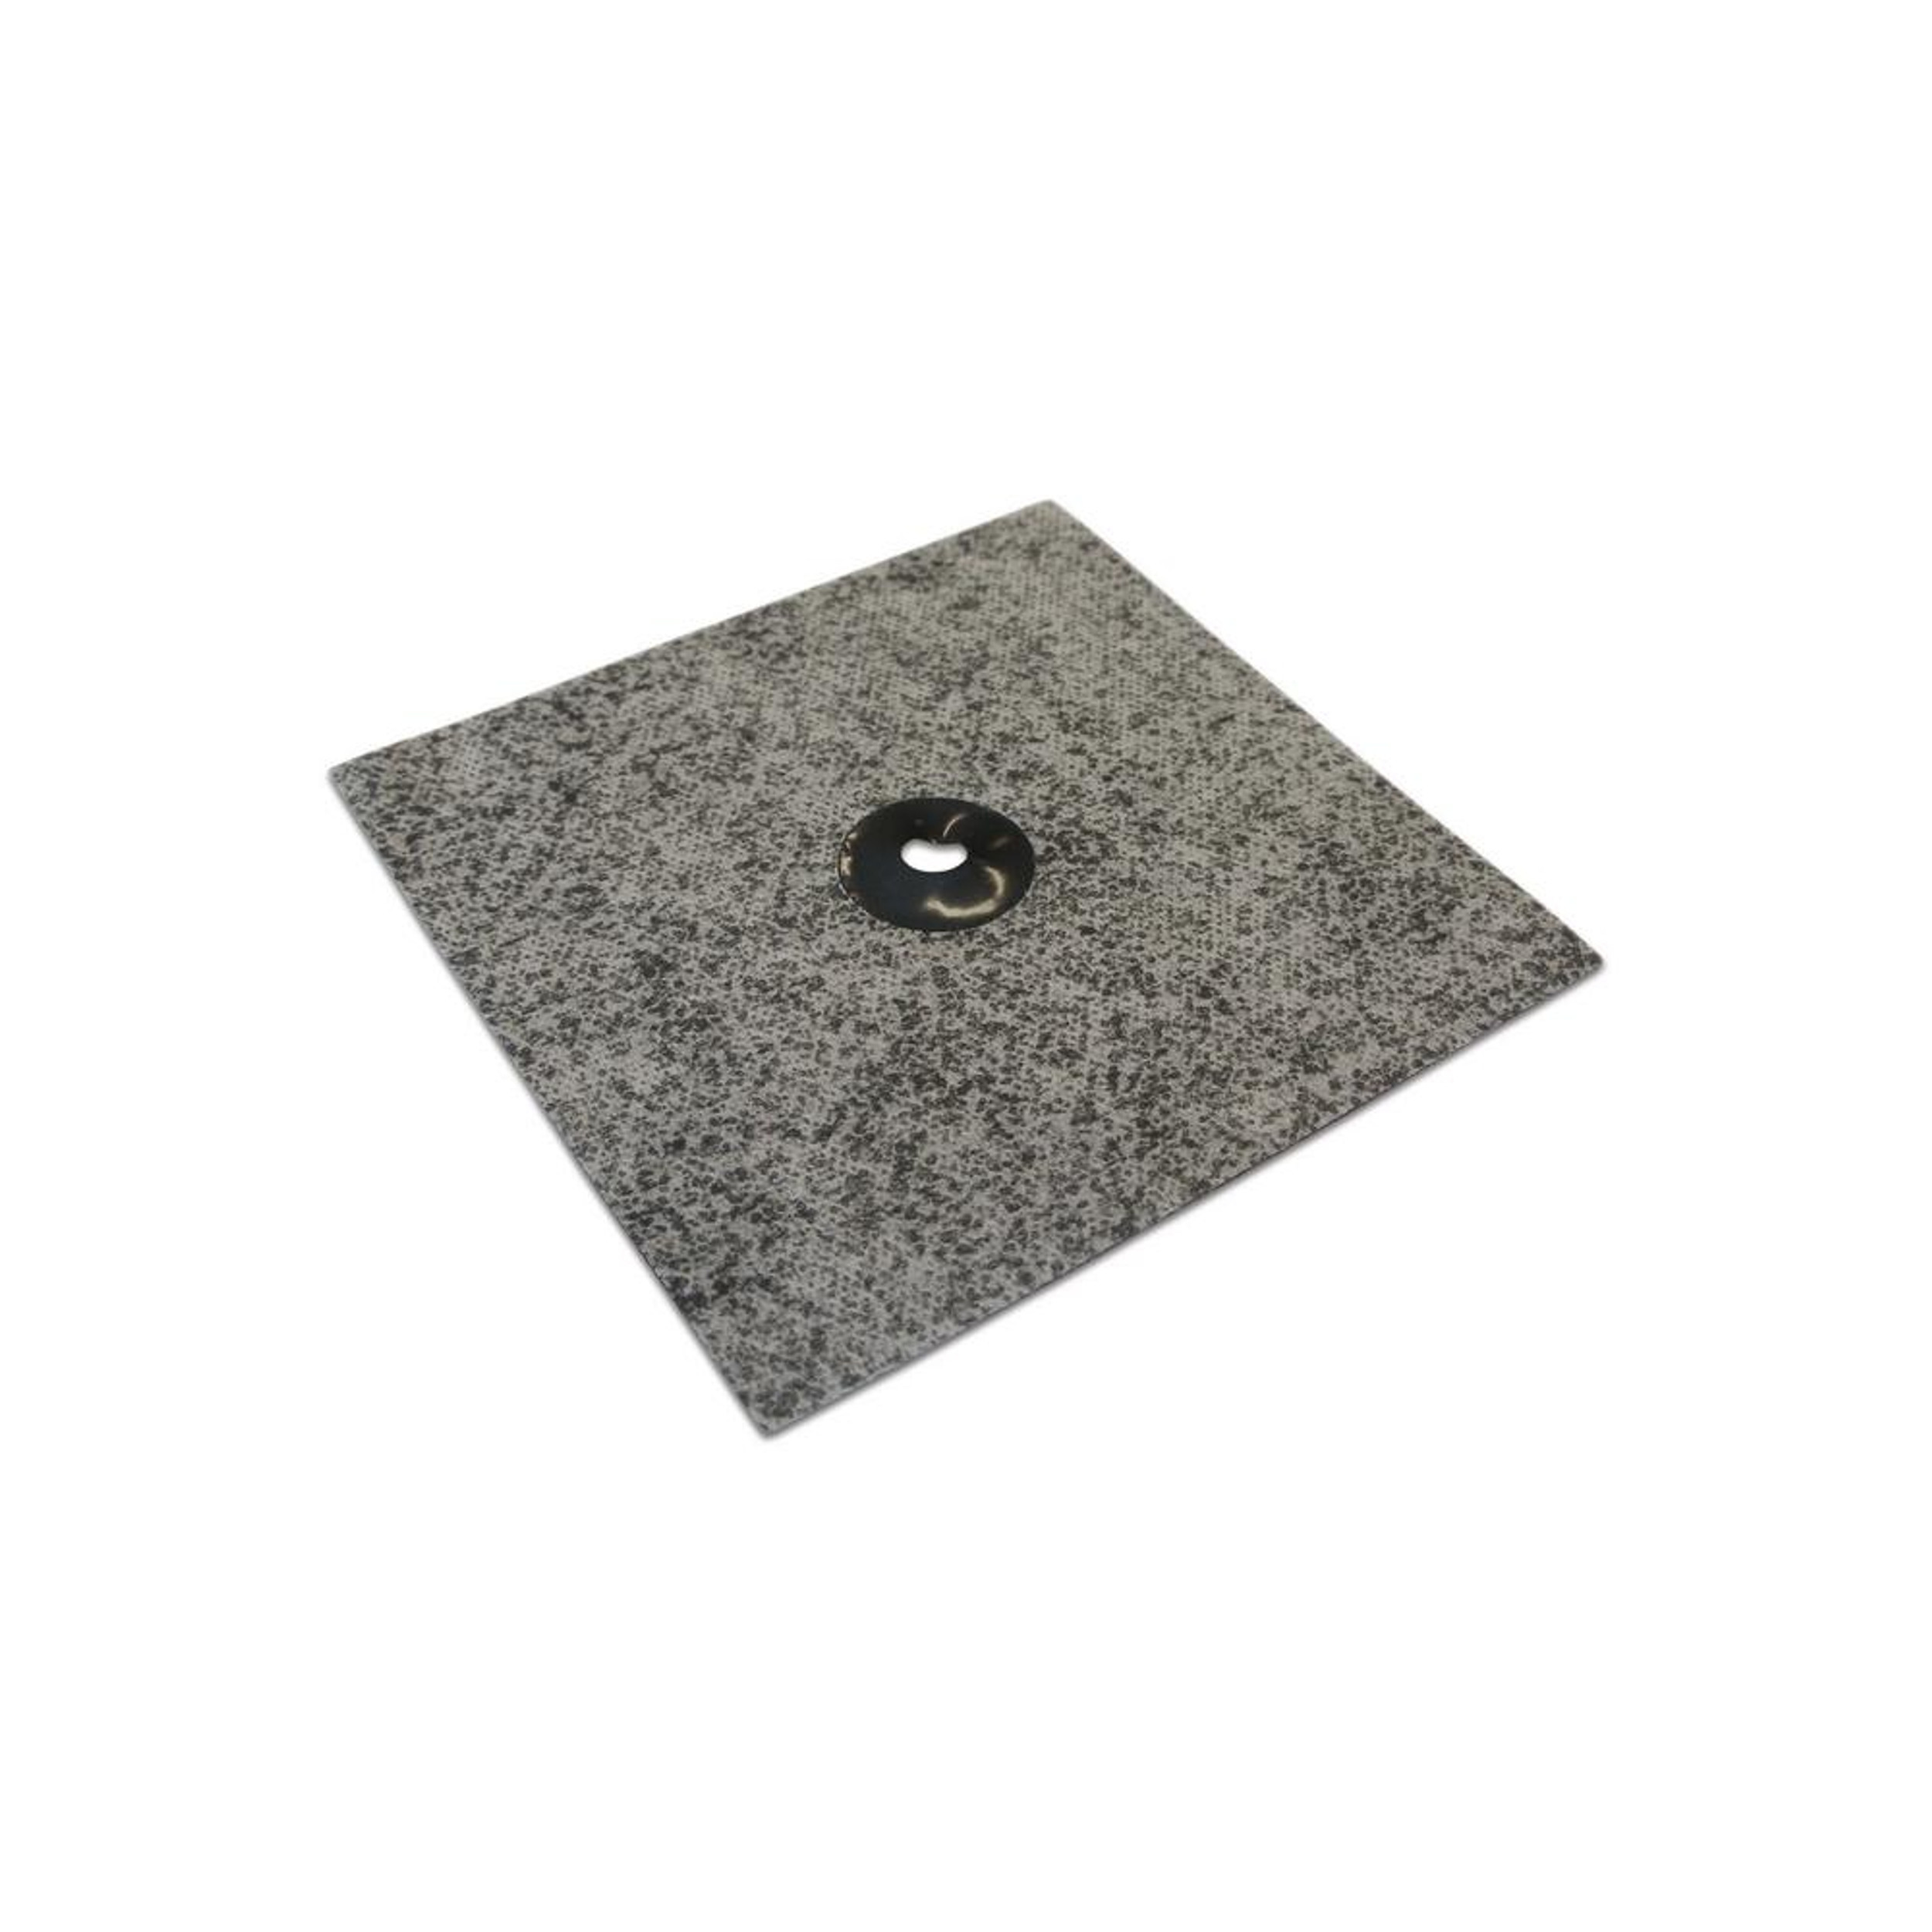 Wedi Flexi Collar for sealing around 1/2" to 3/4" shower pipe protrusions 4 3/4 in. x 4 3/4 in. US5000033